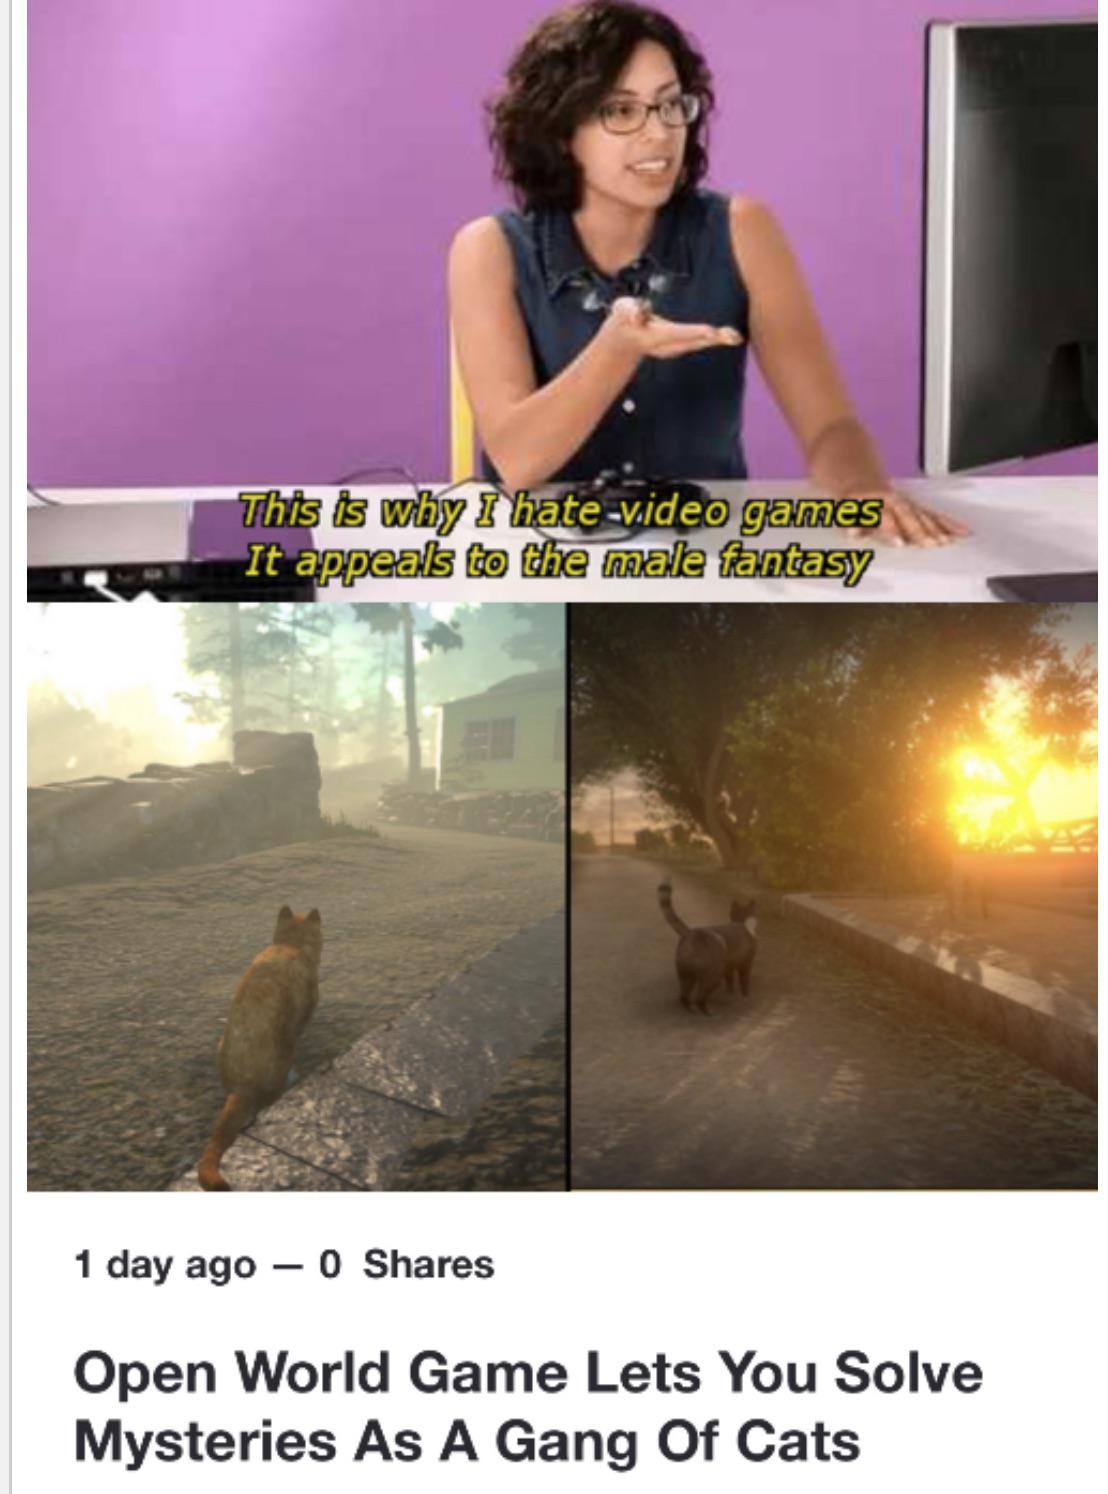 male fantasy meme - This is why I hate video games It appeals to the male fantasy 1 day ago 0 Open World Game Lets You Solve Mysteries As A Gang Of Cats